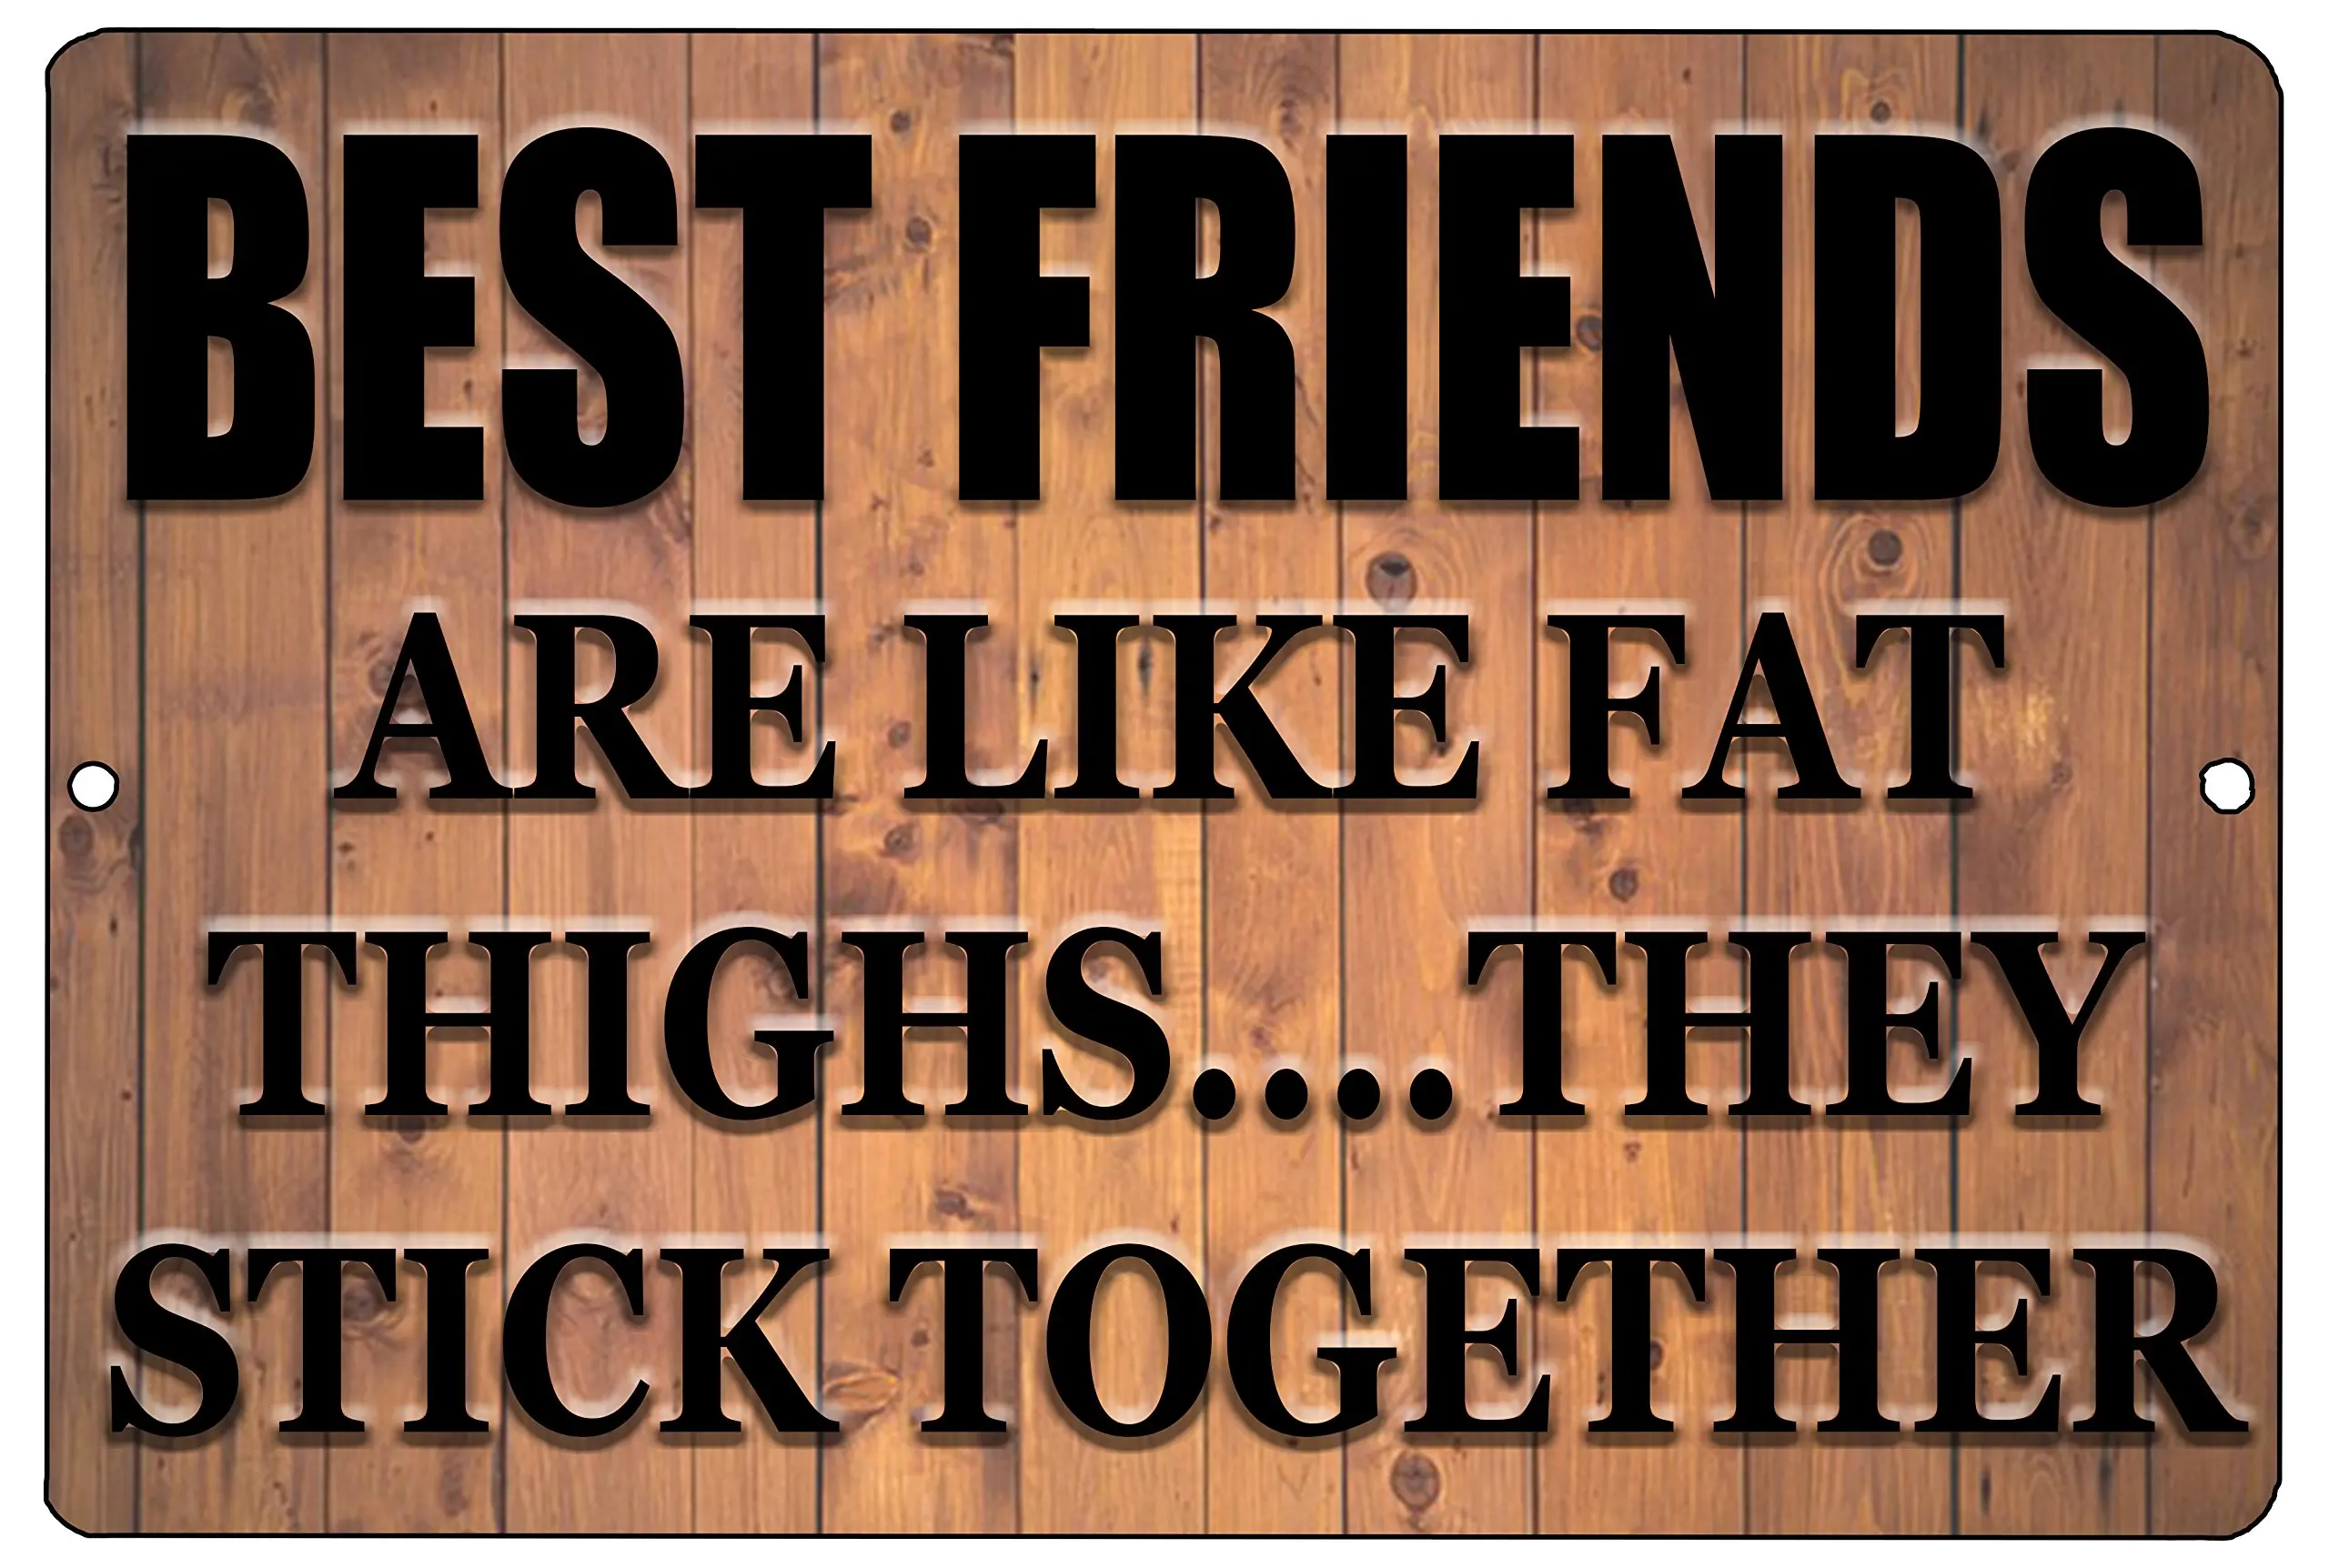 

Rogue River Tactical Best Friends Metal Tin Sign Wall Decor Bar Best Friends are Like Fat Thighs They Stick Together